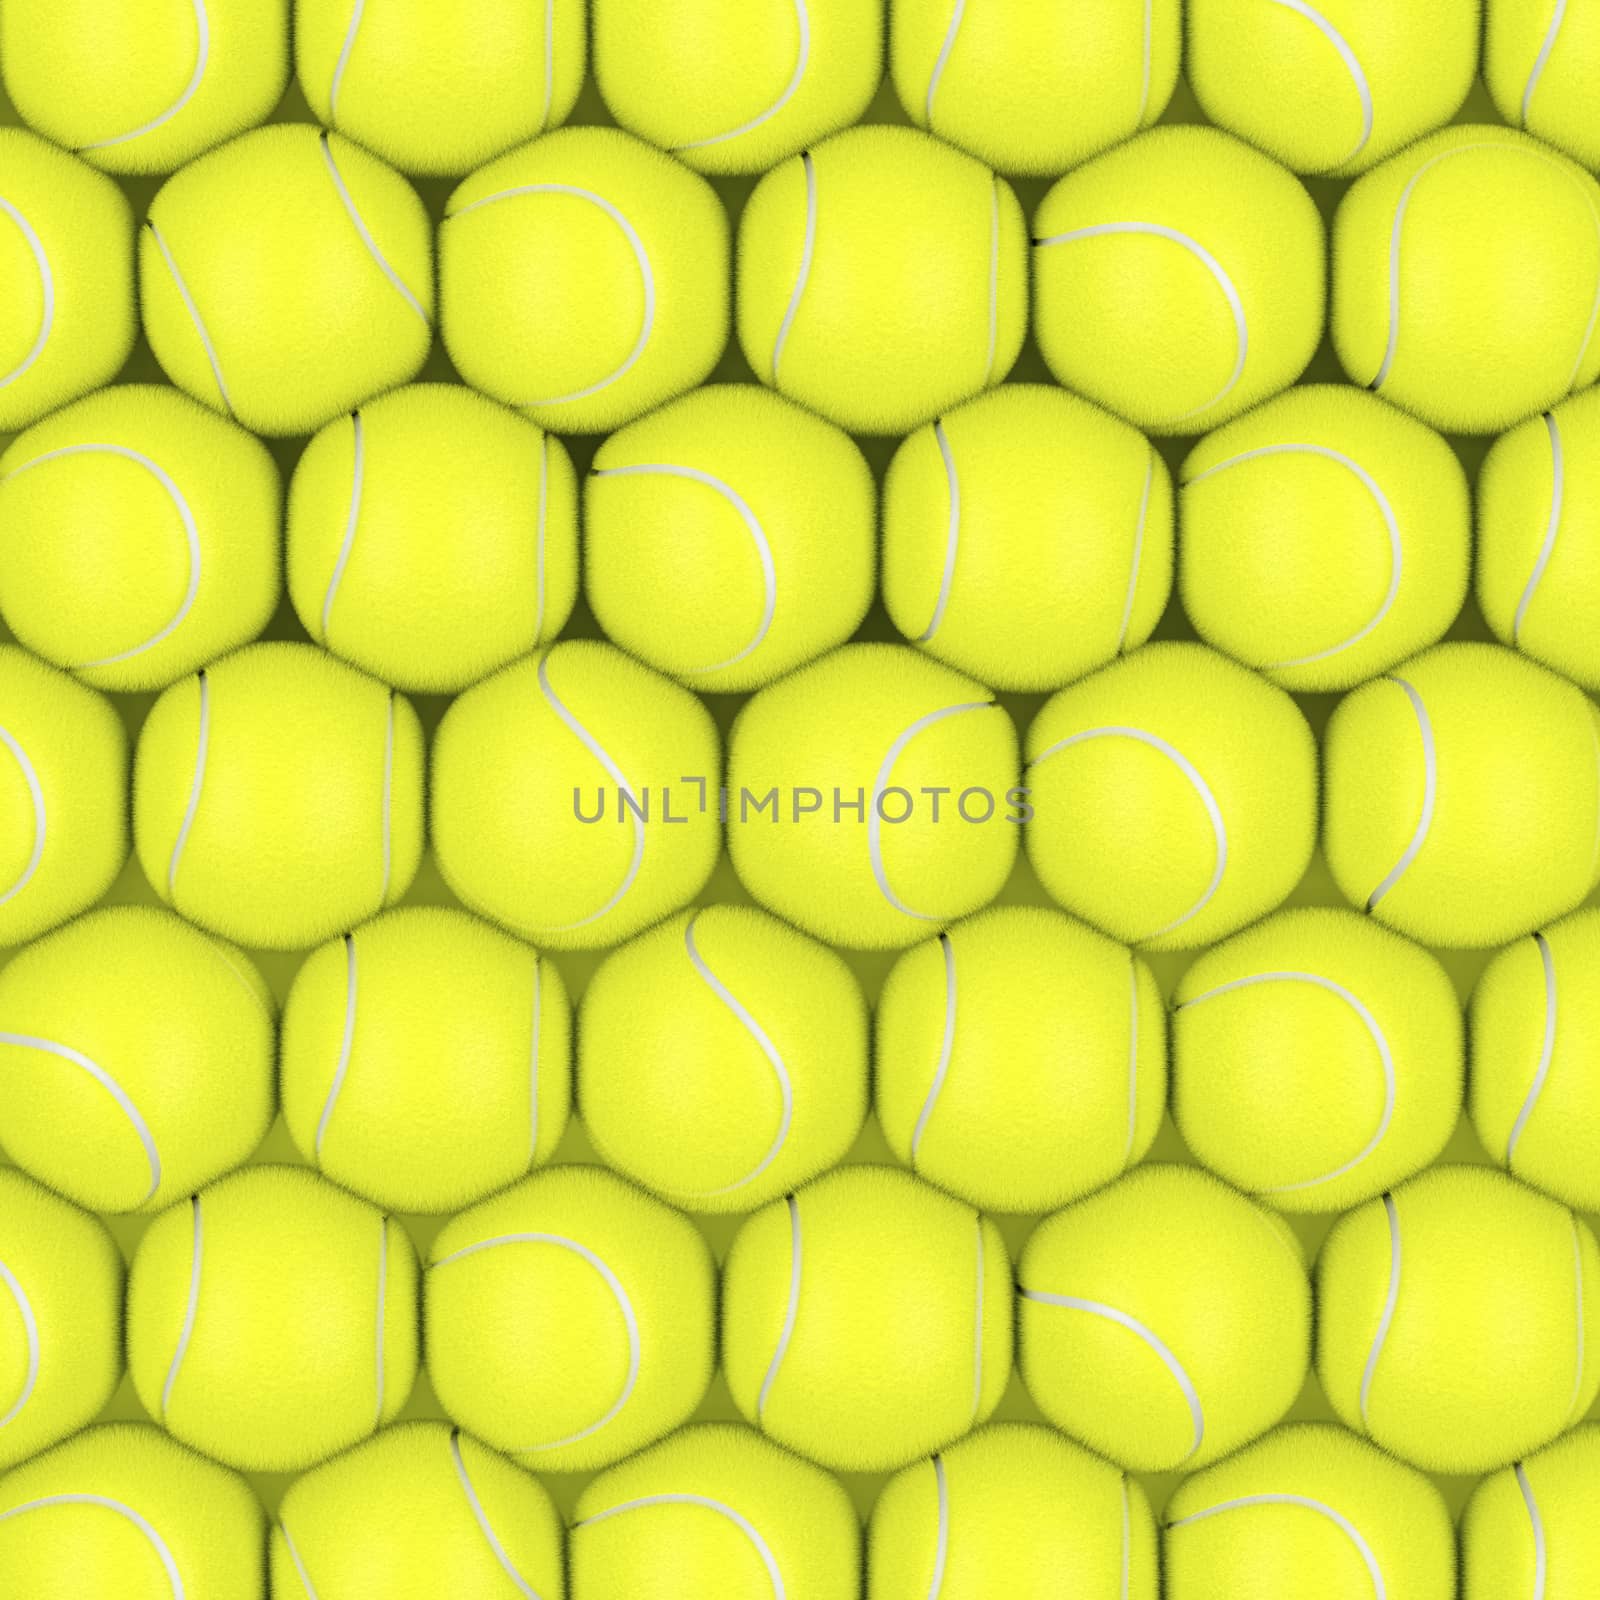 Multiple rows with tennis balls, top view